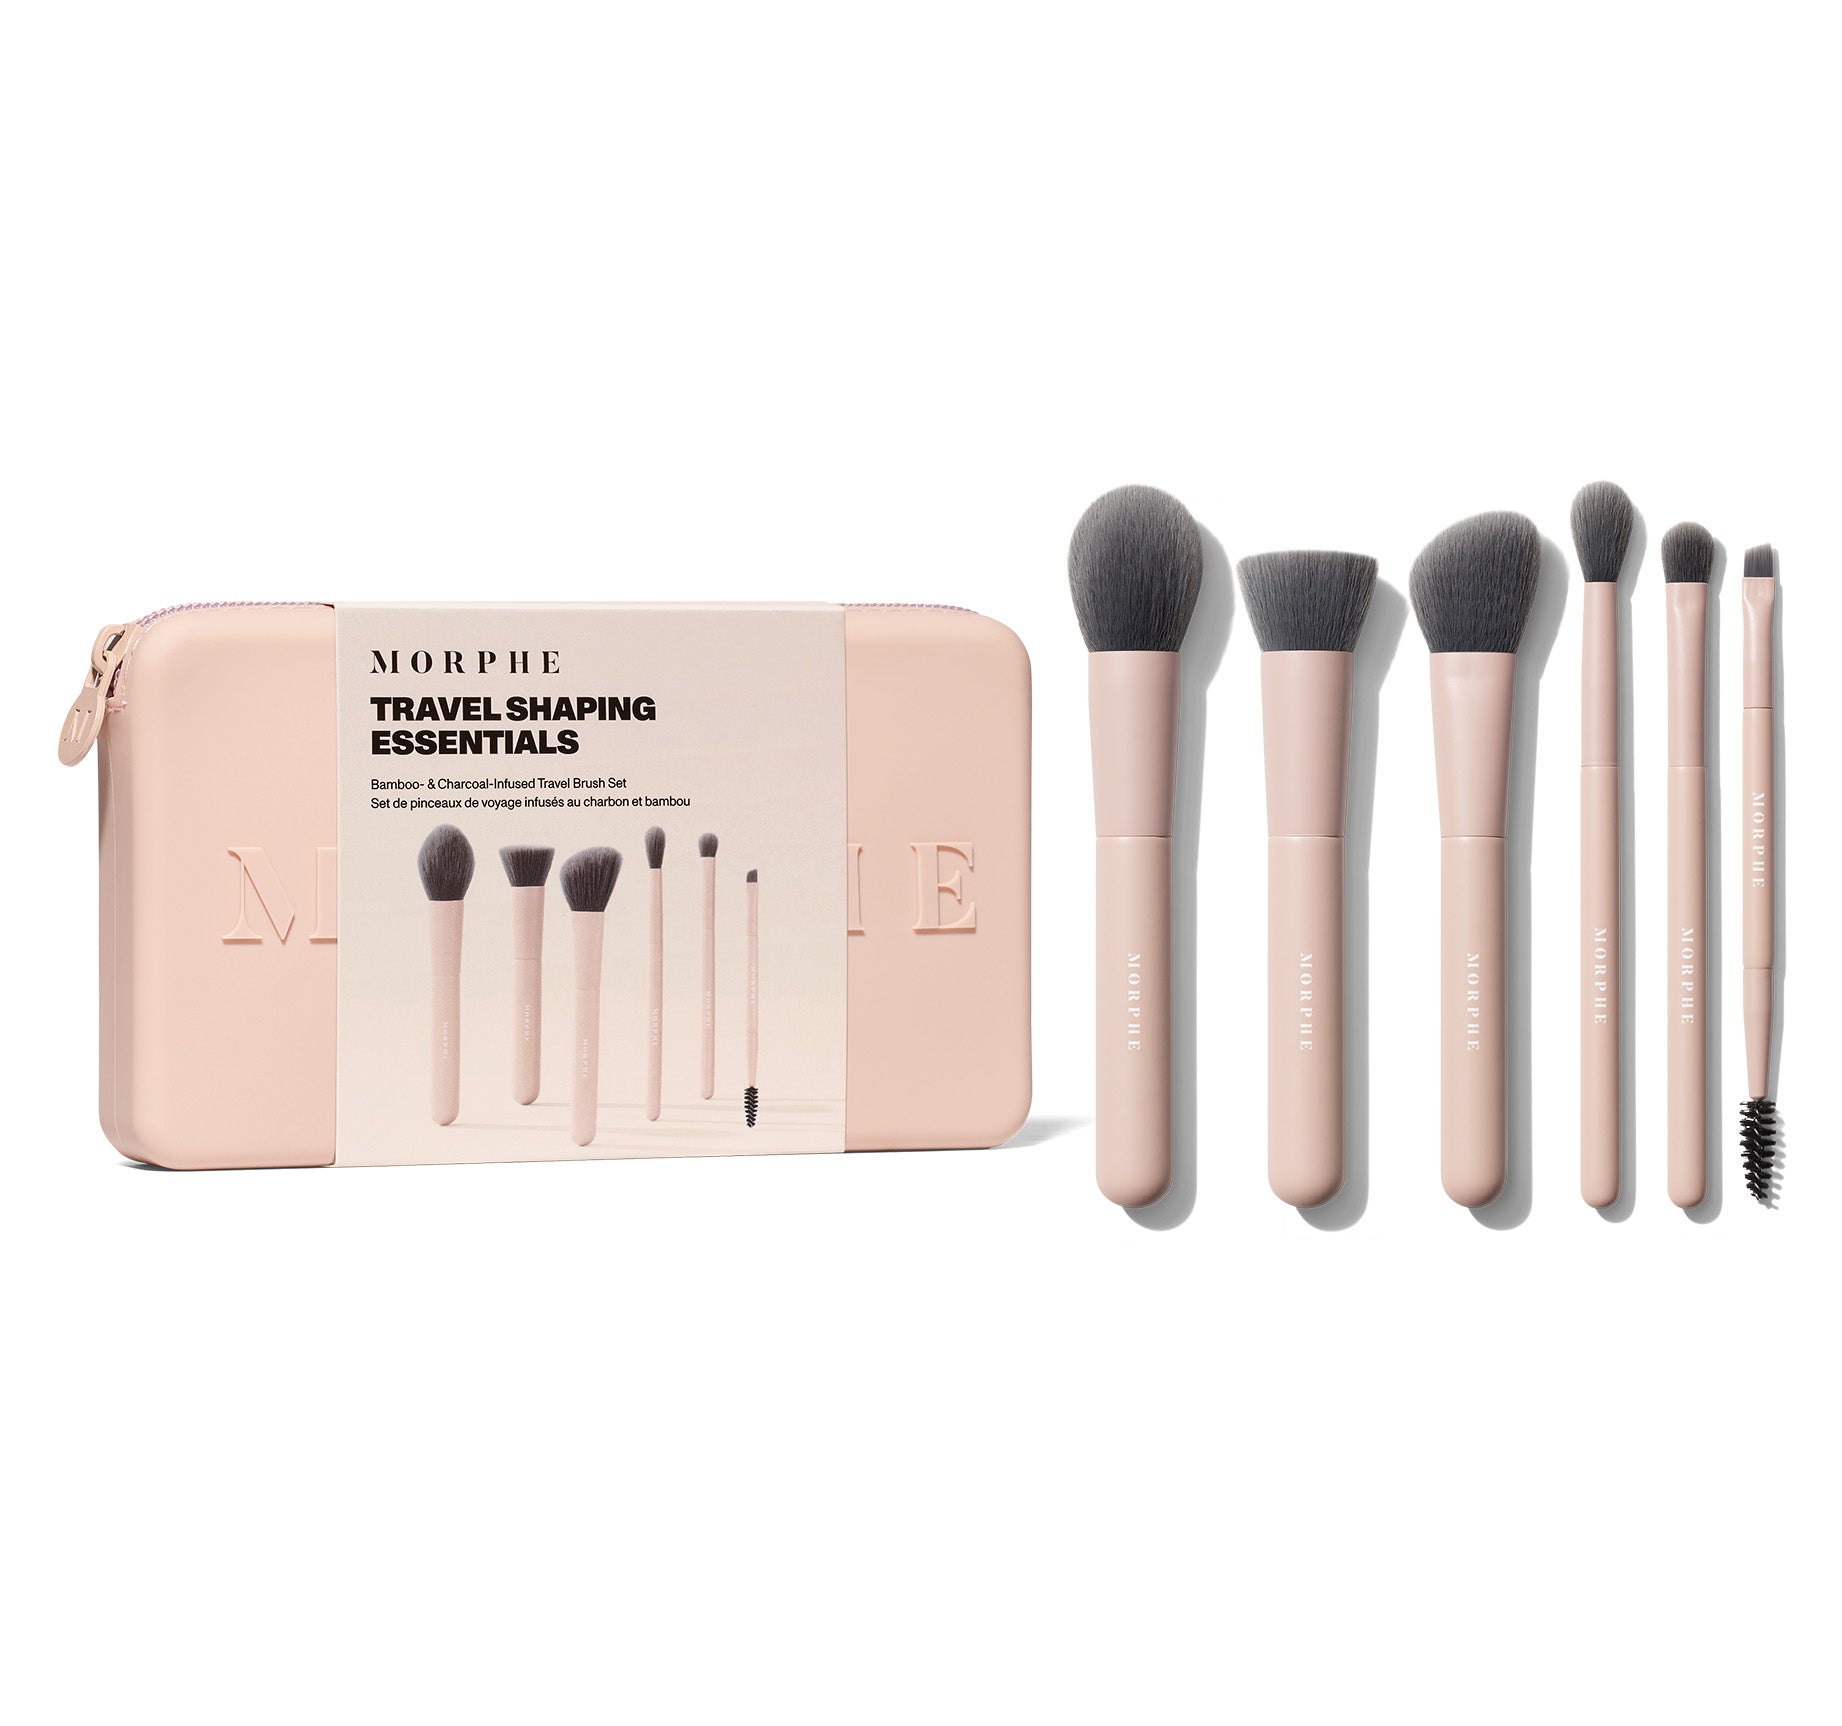 Travel Shaping Essentials Bamboo & Charcoal Infused Travel Brush Set - Image 1